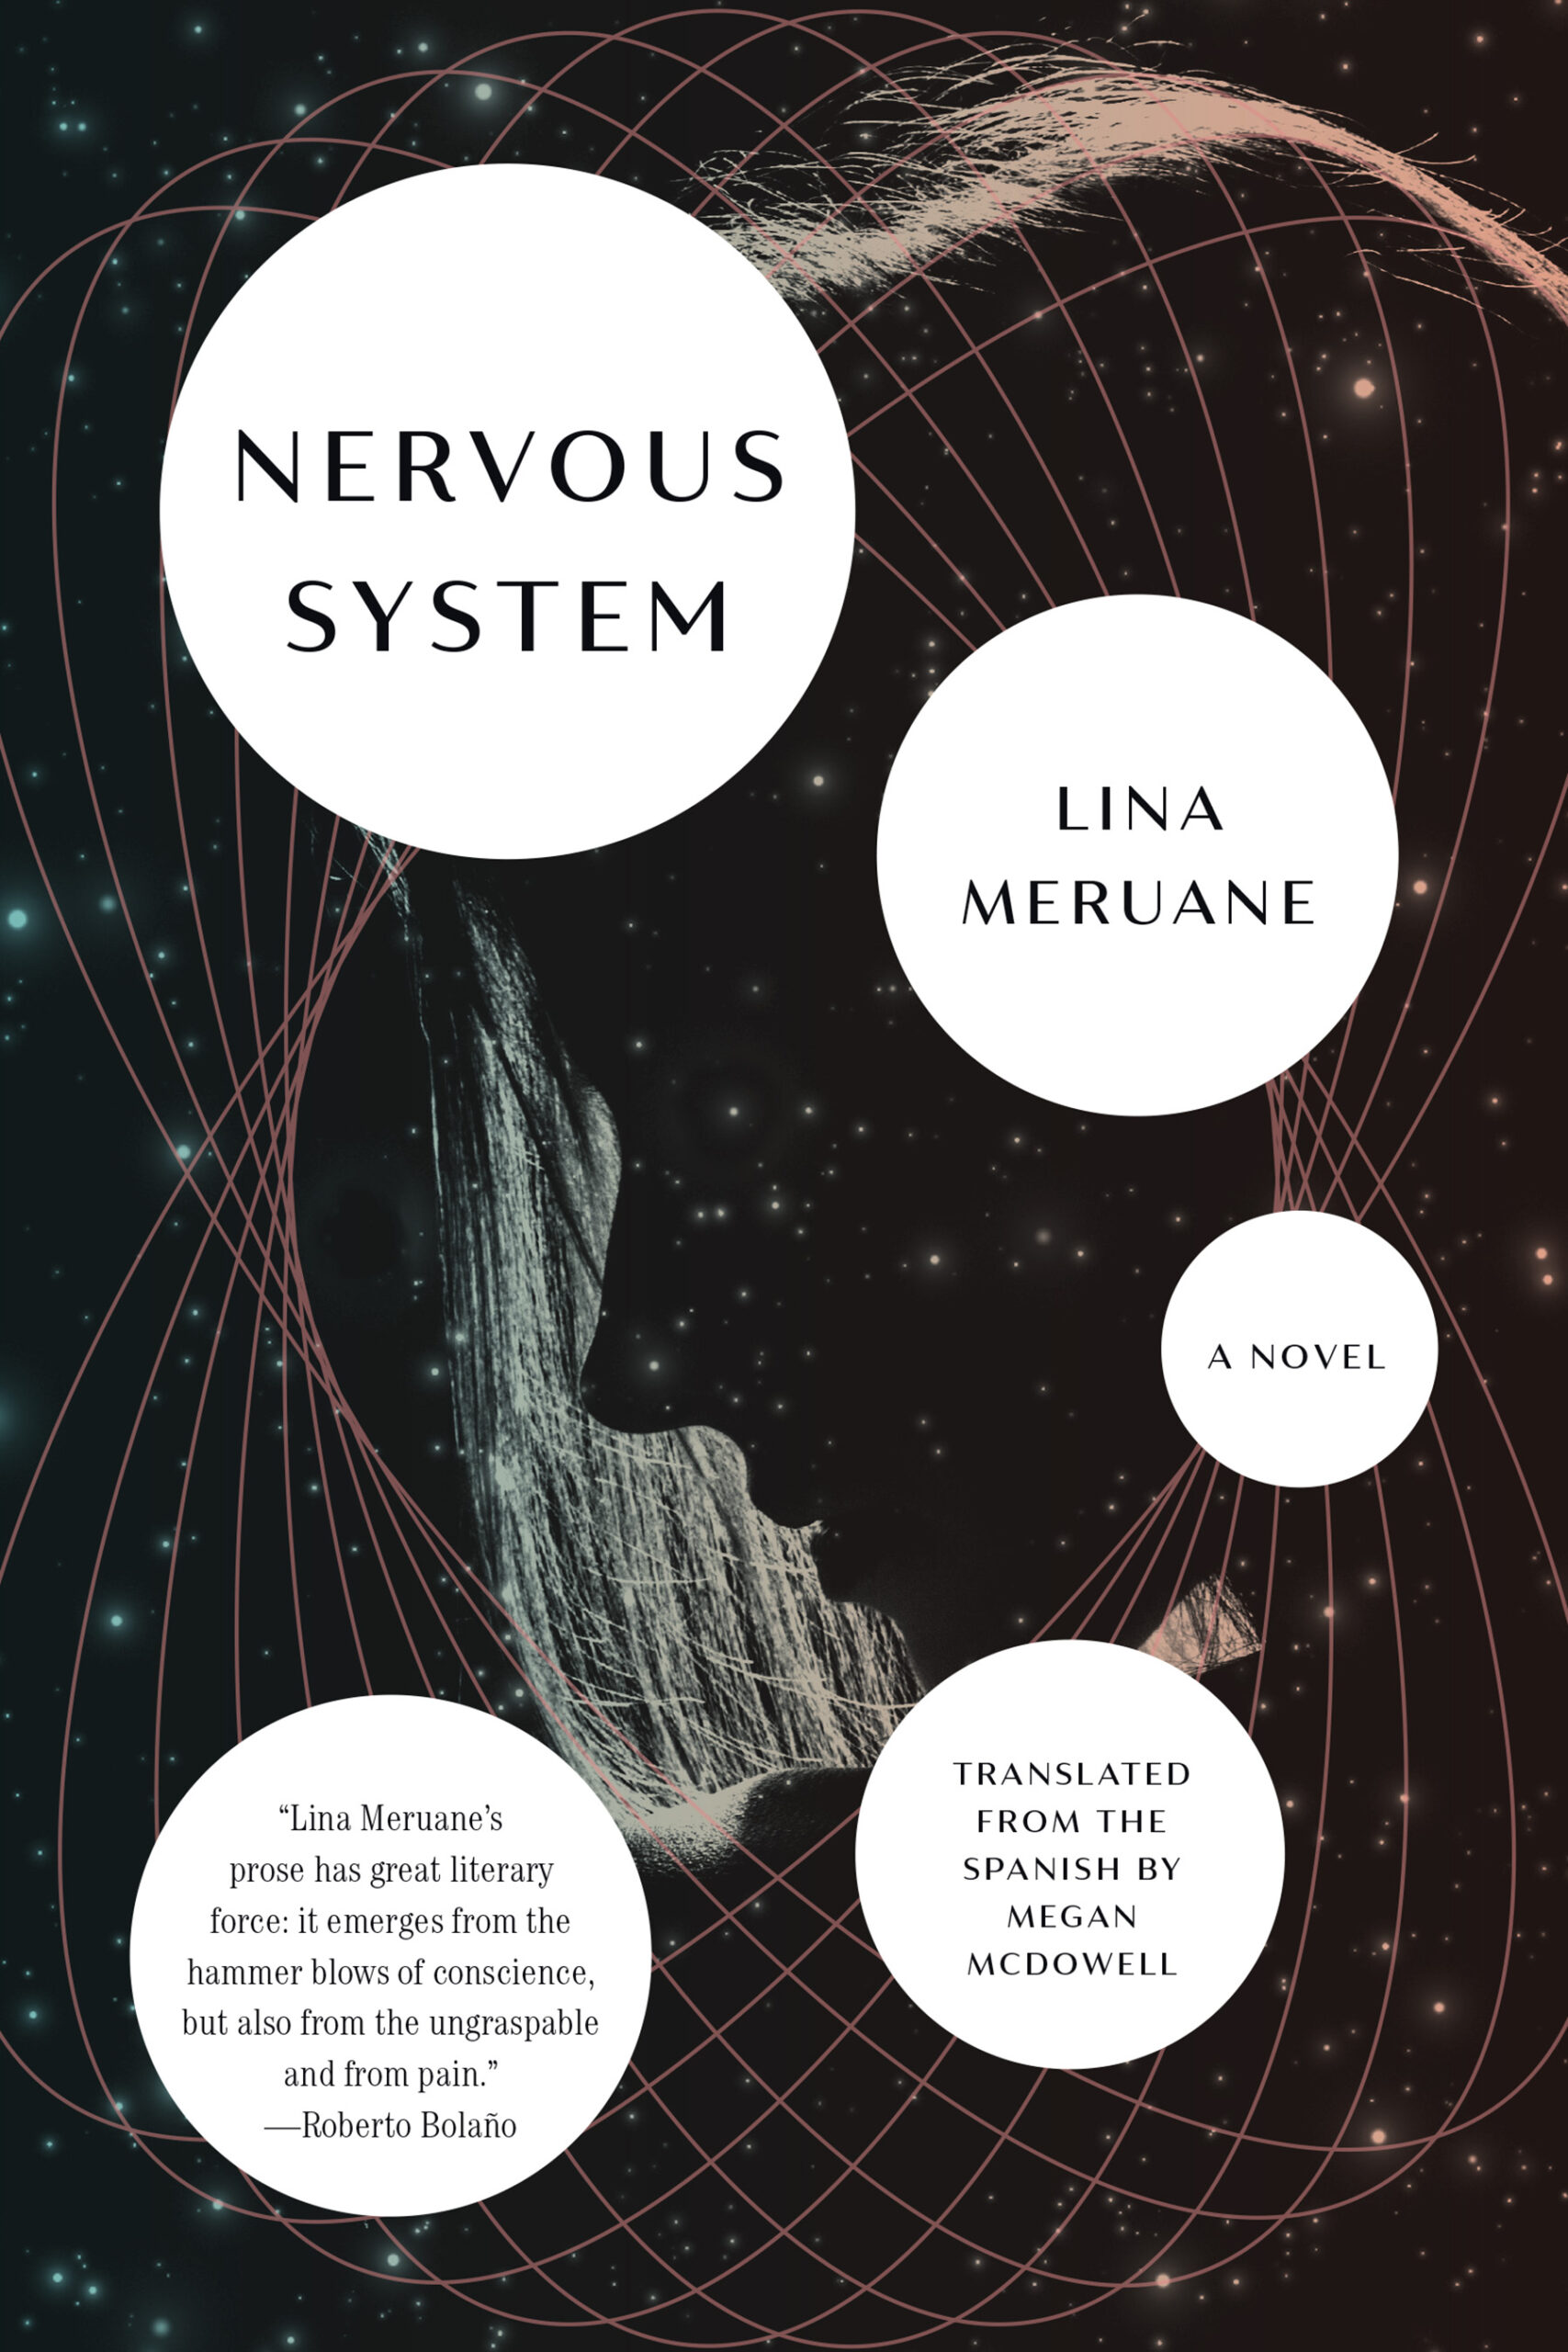 Nervous System book covers